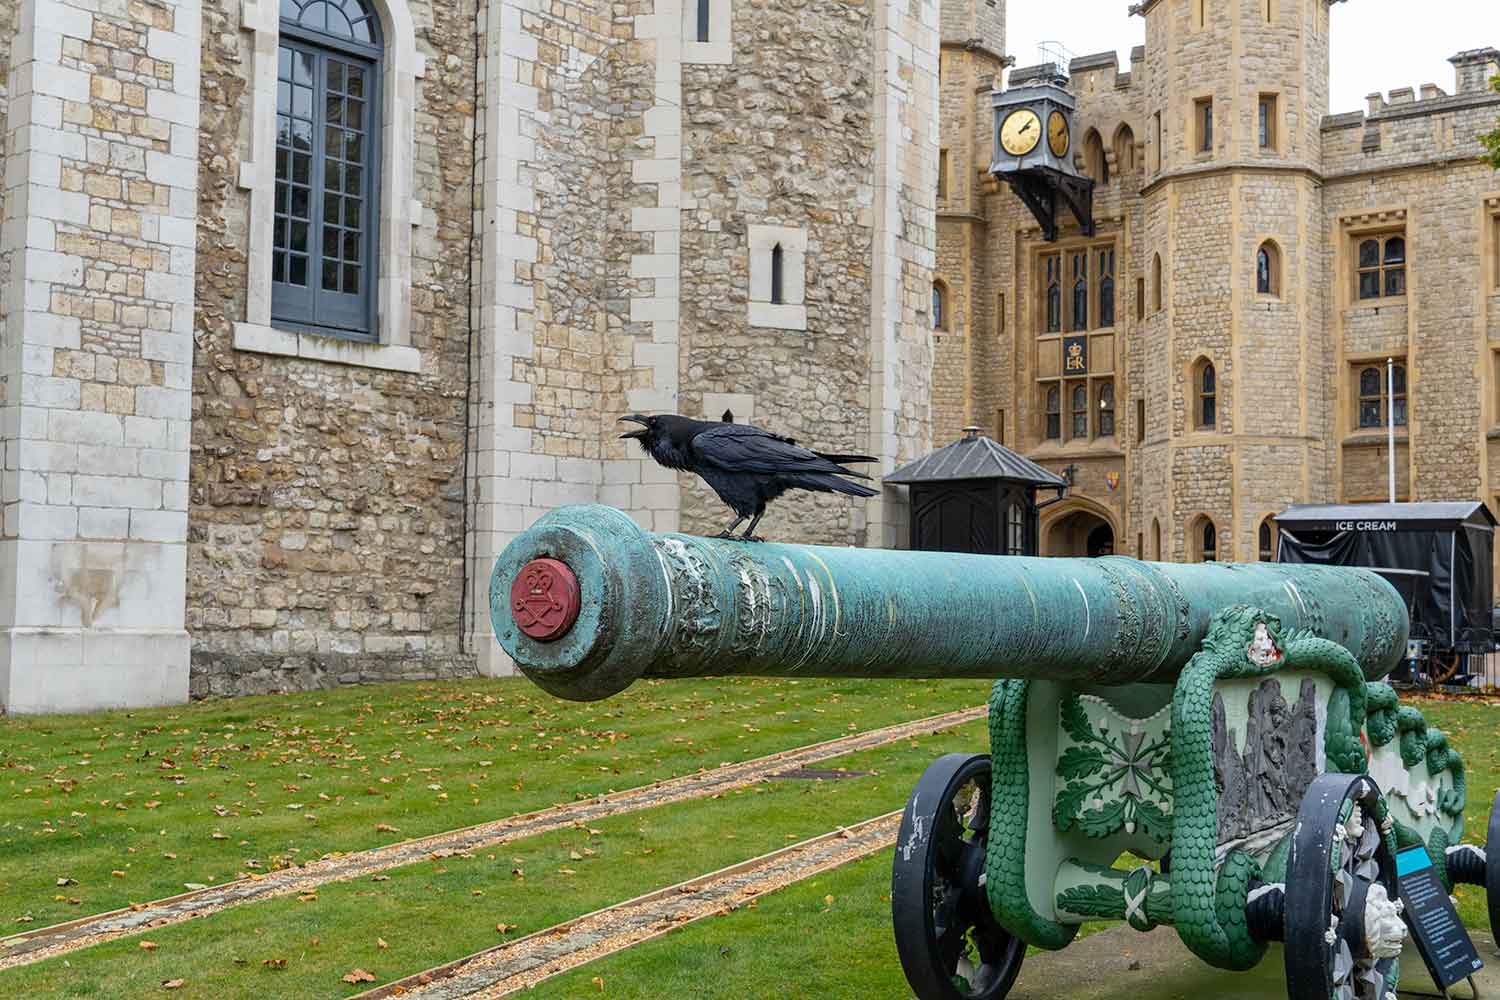 Raven on a Cannon, Tower of London, London, United Kingdom